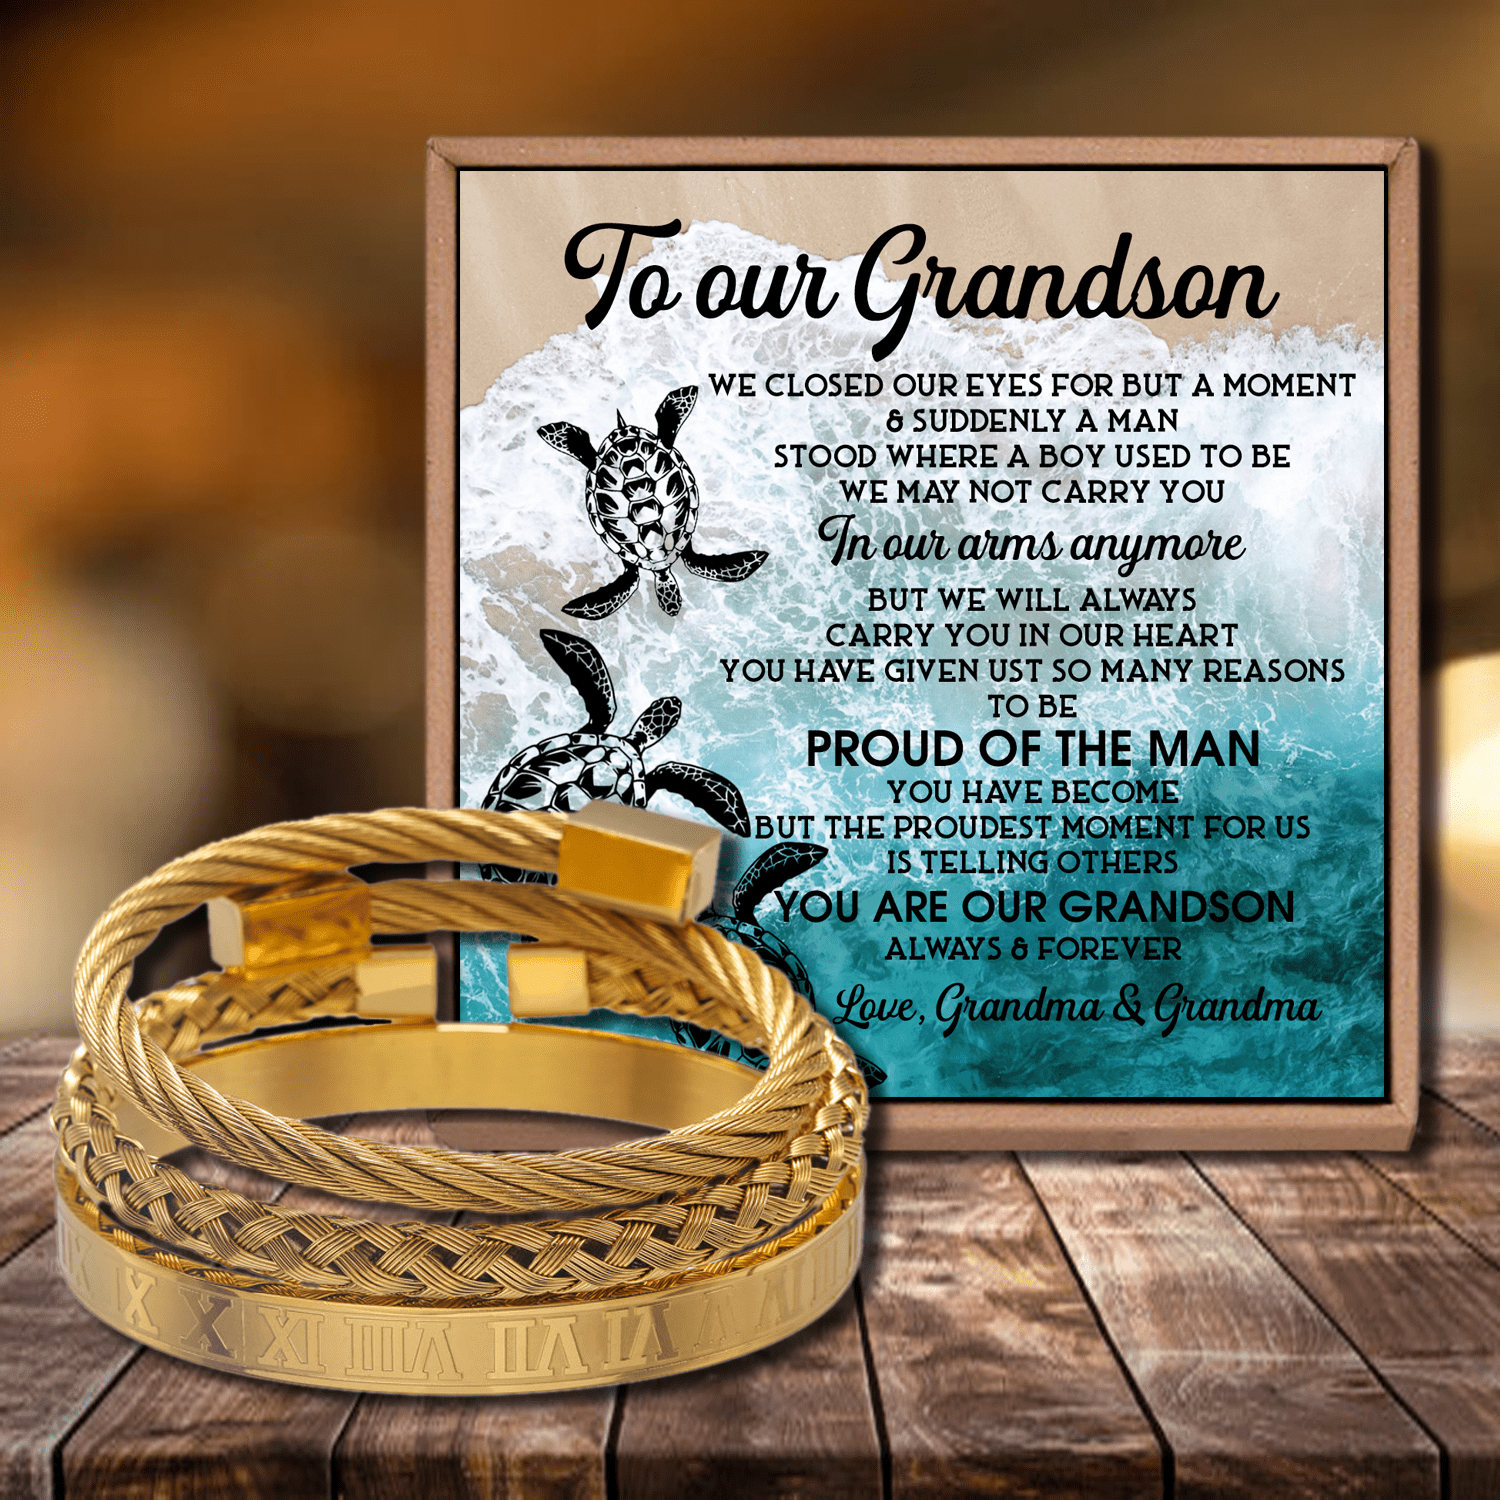 Bracelets To Our Grandson - Proud Of The Man Roman Numeral Bracelet Set Gold GiveMe-Gifts